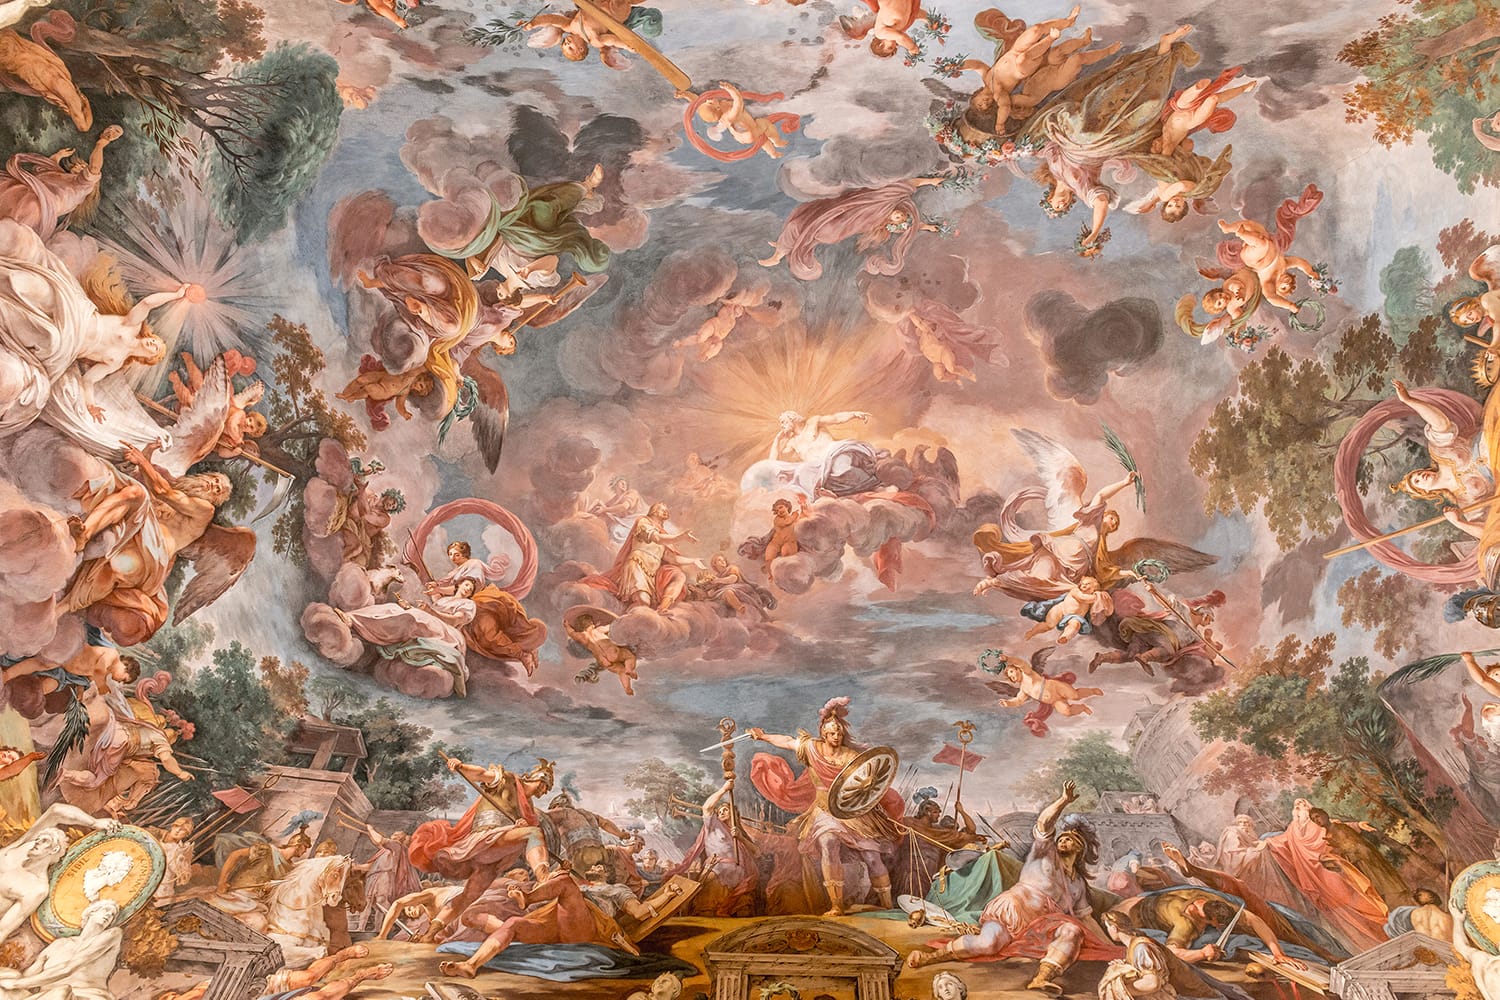 Marvellous fresco with Marcus Furius Camillus' battle victory (close-up) from Villa Borghese's hall, XVII century